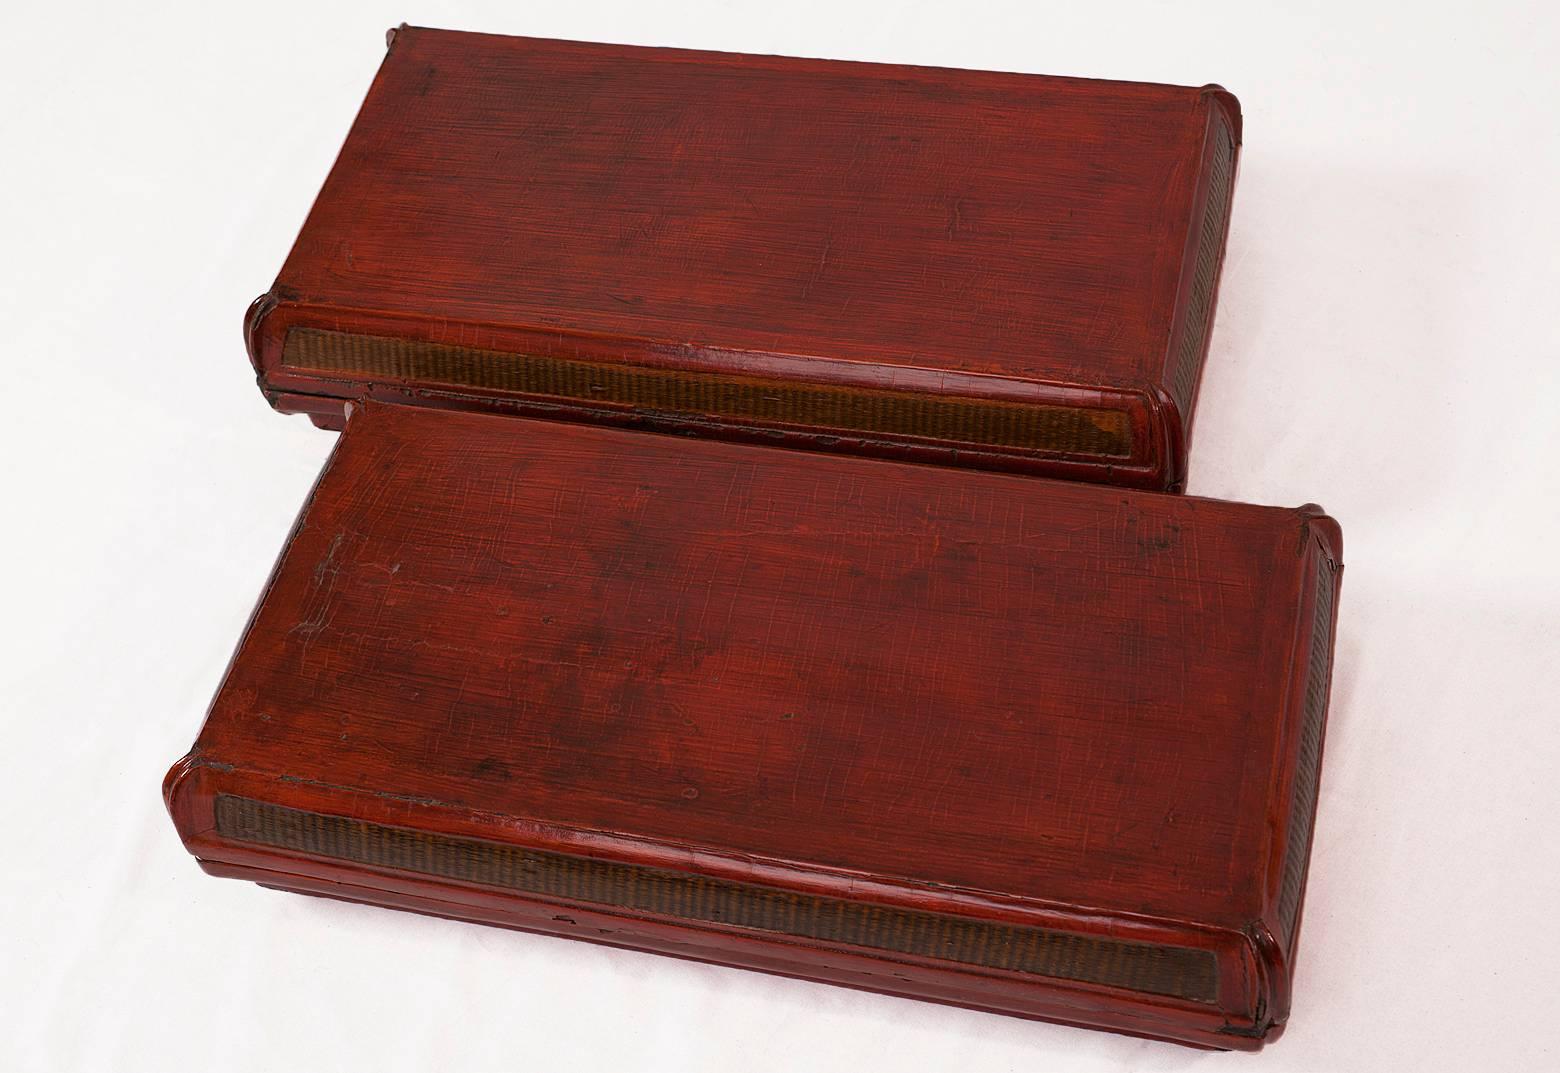 
A decorative pair of 19th century Chinese red lacquer food boxes with cane weaving from Shanxi province. 

This type of box was usually used as gift for important people presented during one of the official outdoors events so popular in Shanxi. The